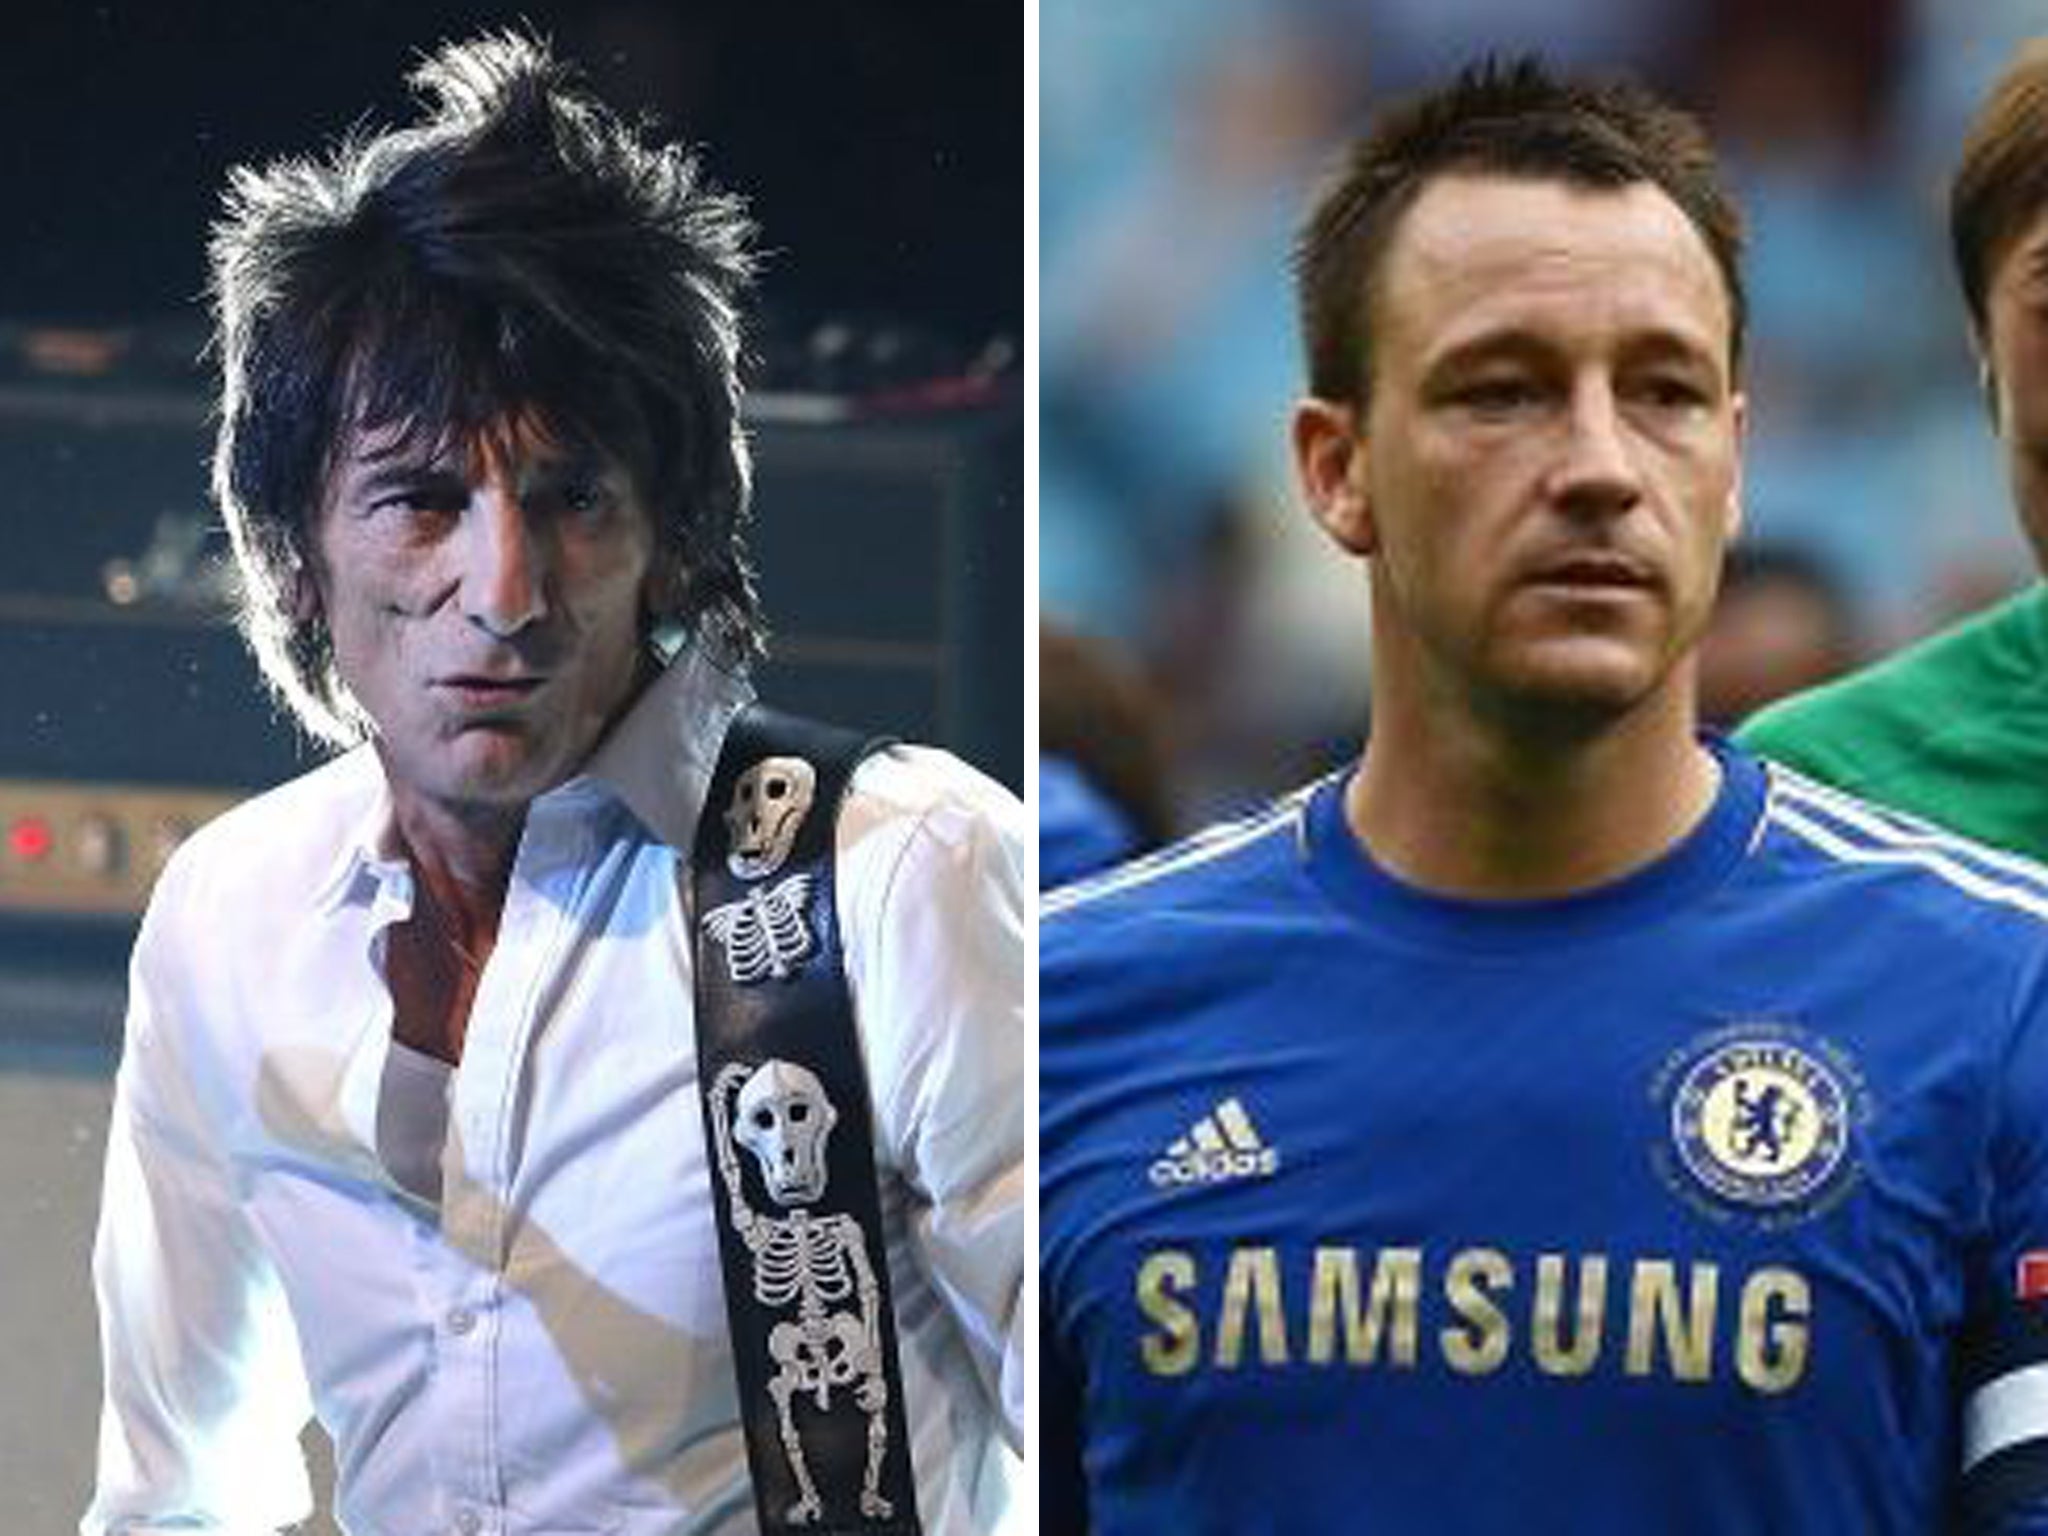 Alan Tierney admitted selling information about Chelsea footballer John Terry's mother and Rolling Stone Ronnie Wood